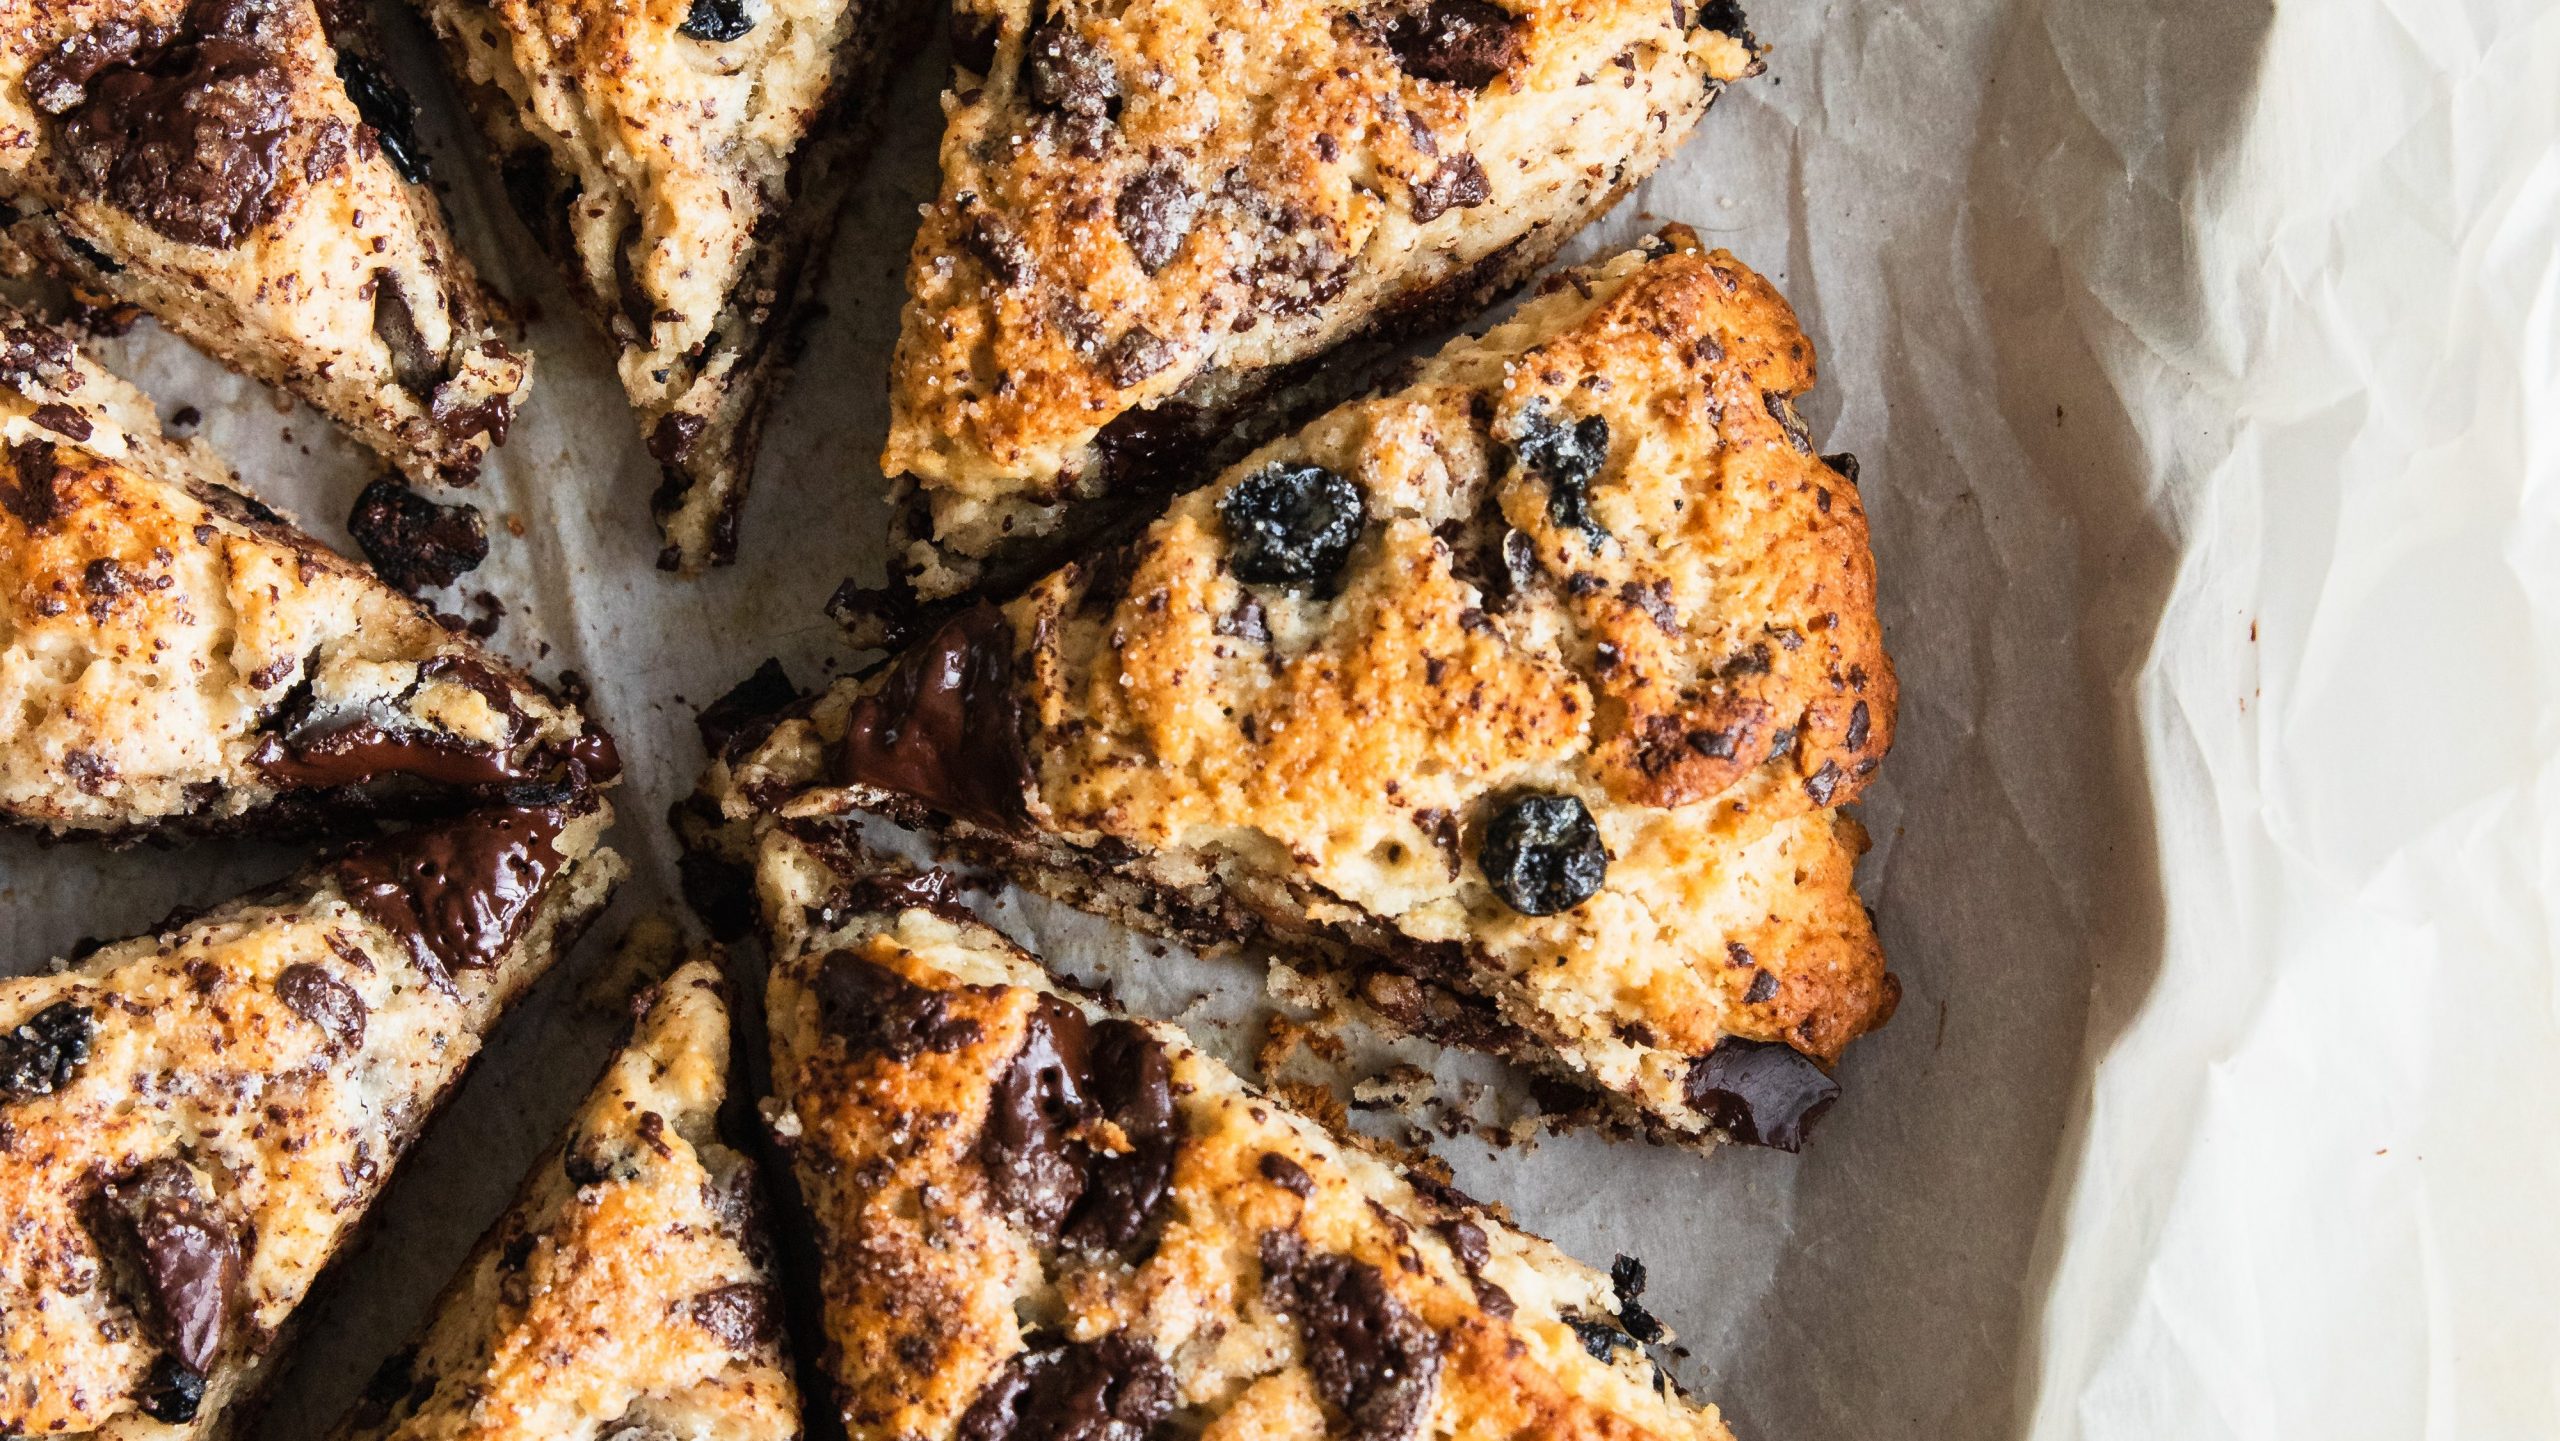 Blueberry Chocolate Scones wedges baked to golden brown perfection